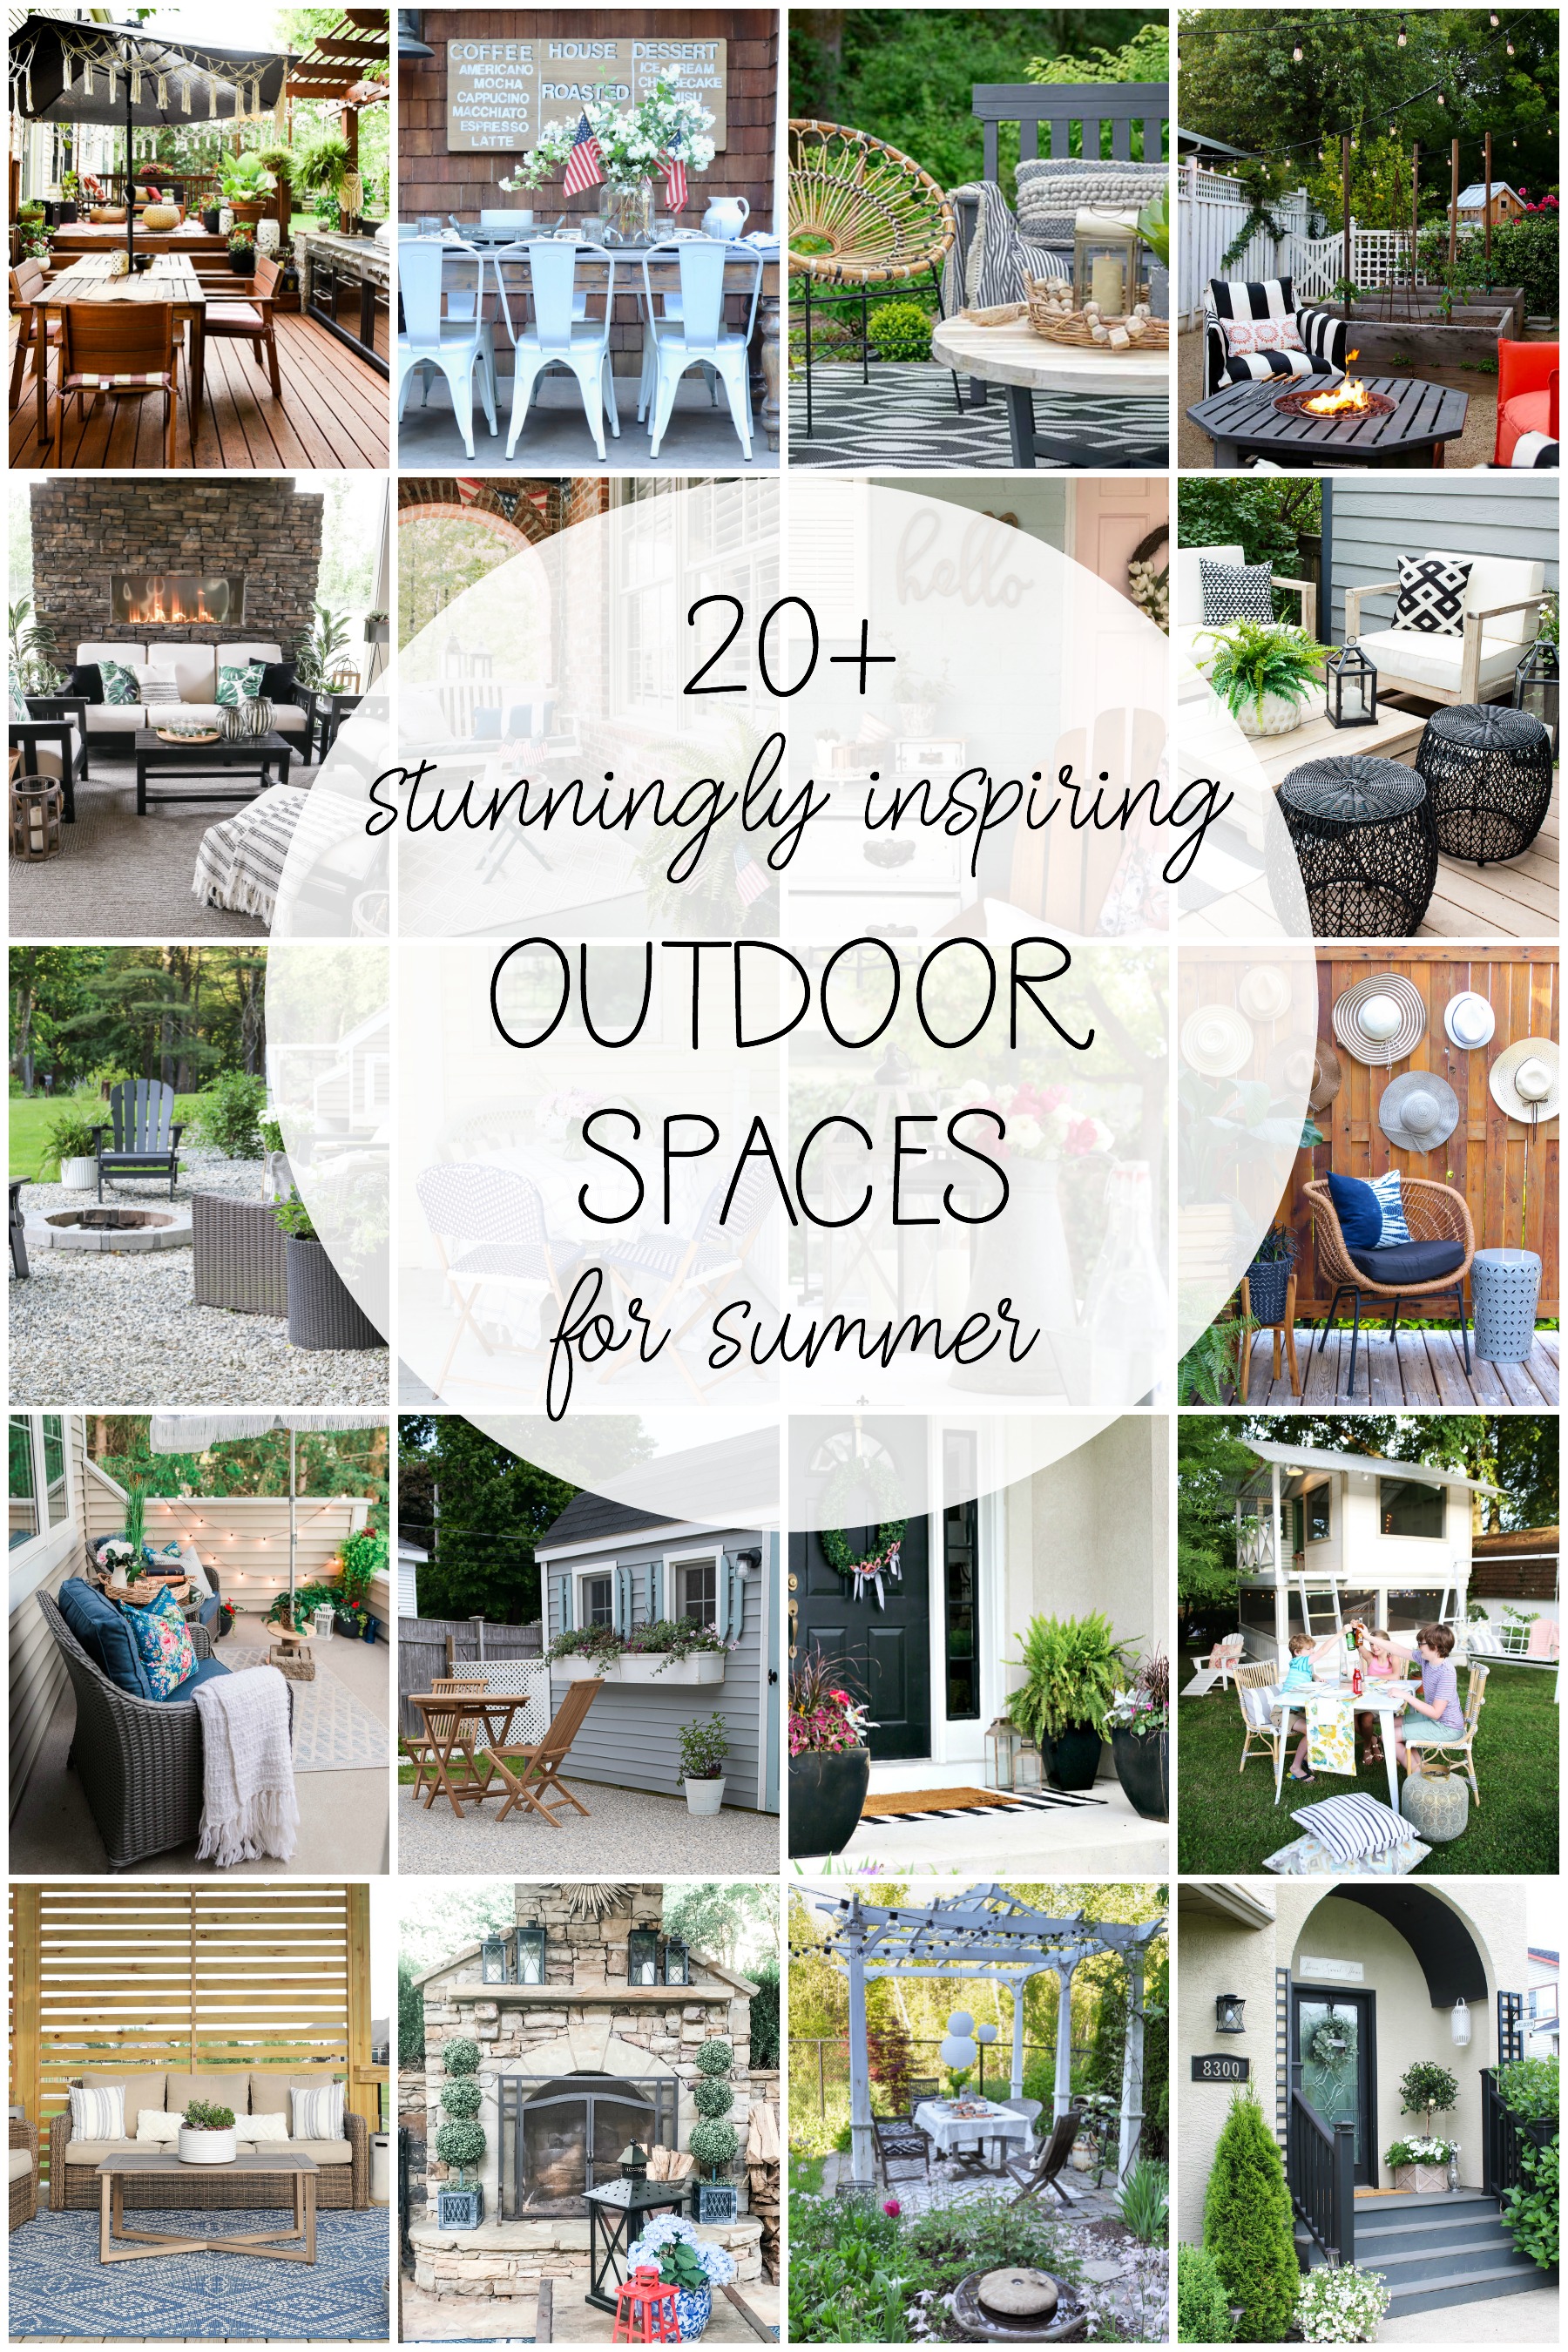 Inspiring outdoor spaces poster.